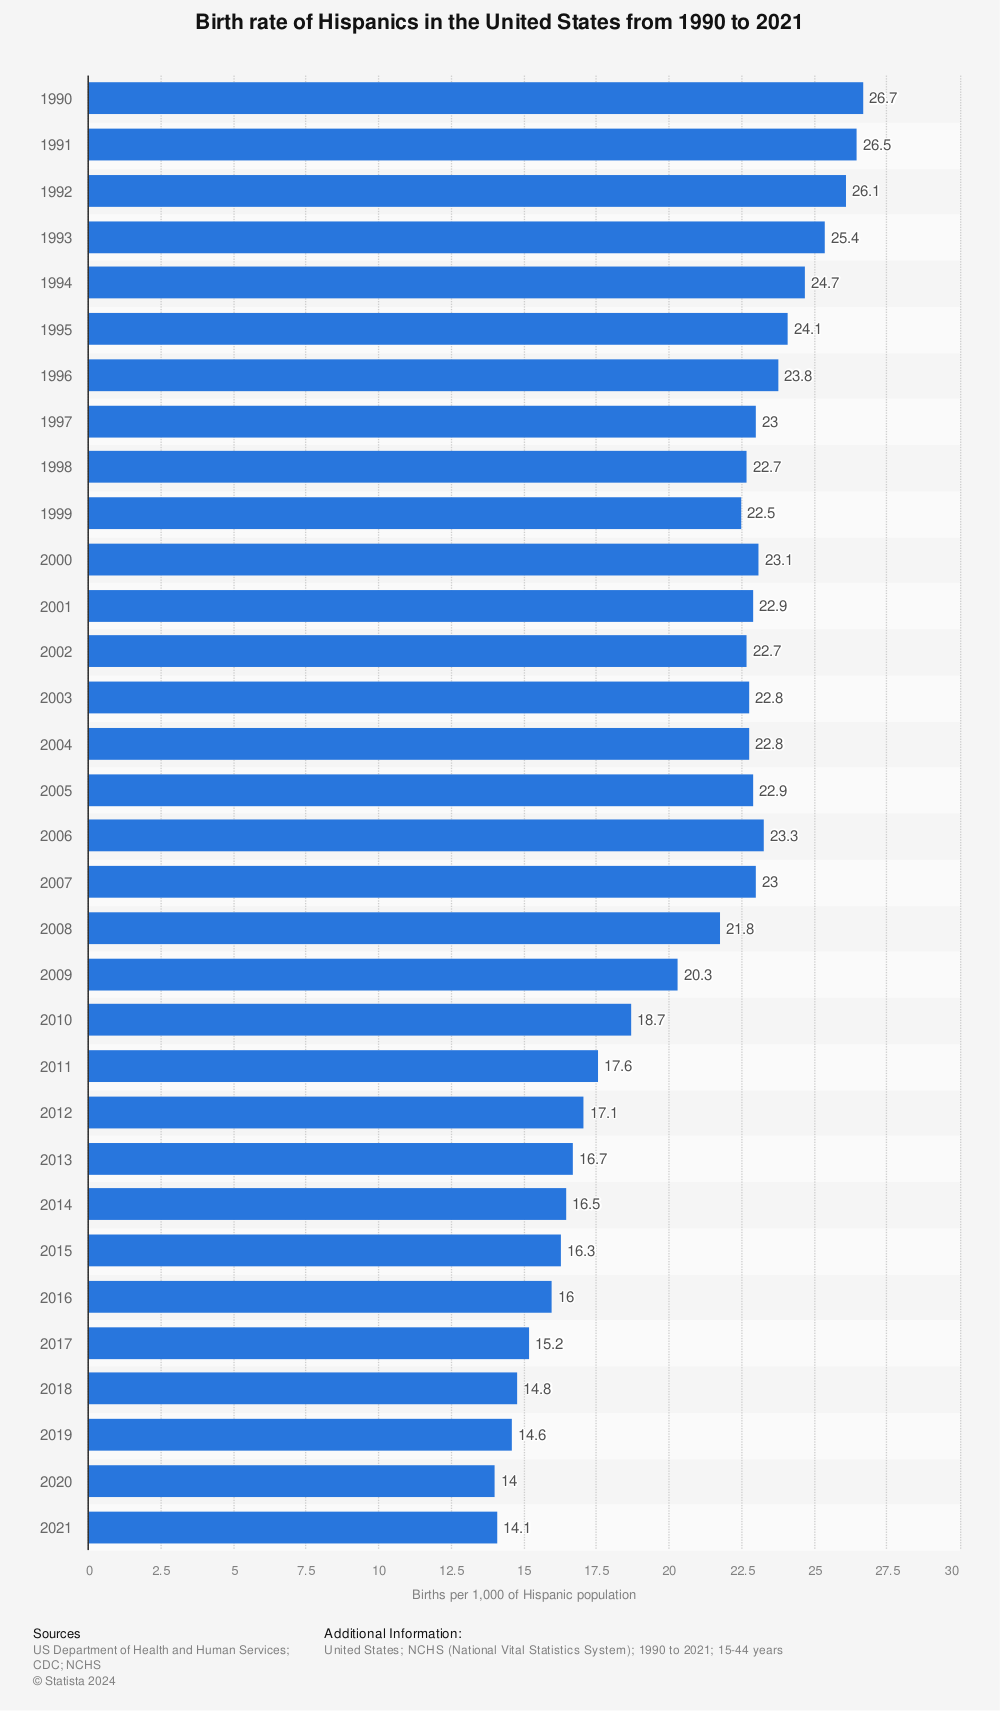 Statistic: Birth rate of Hispanics in the United States from 1990 to 2020 | Statista